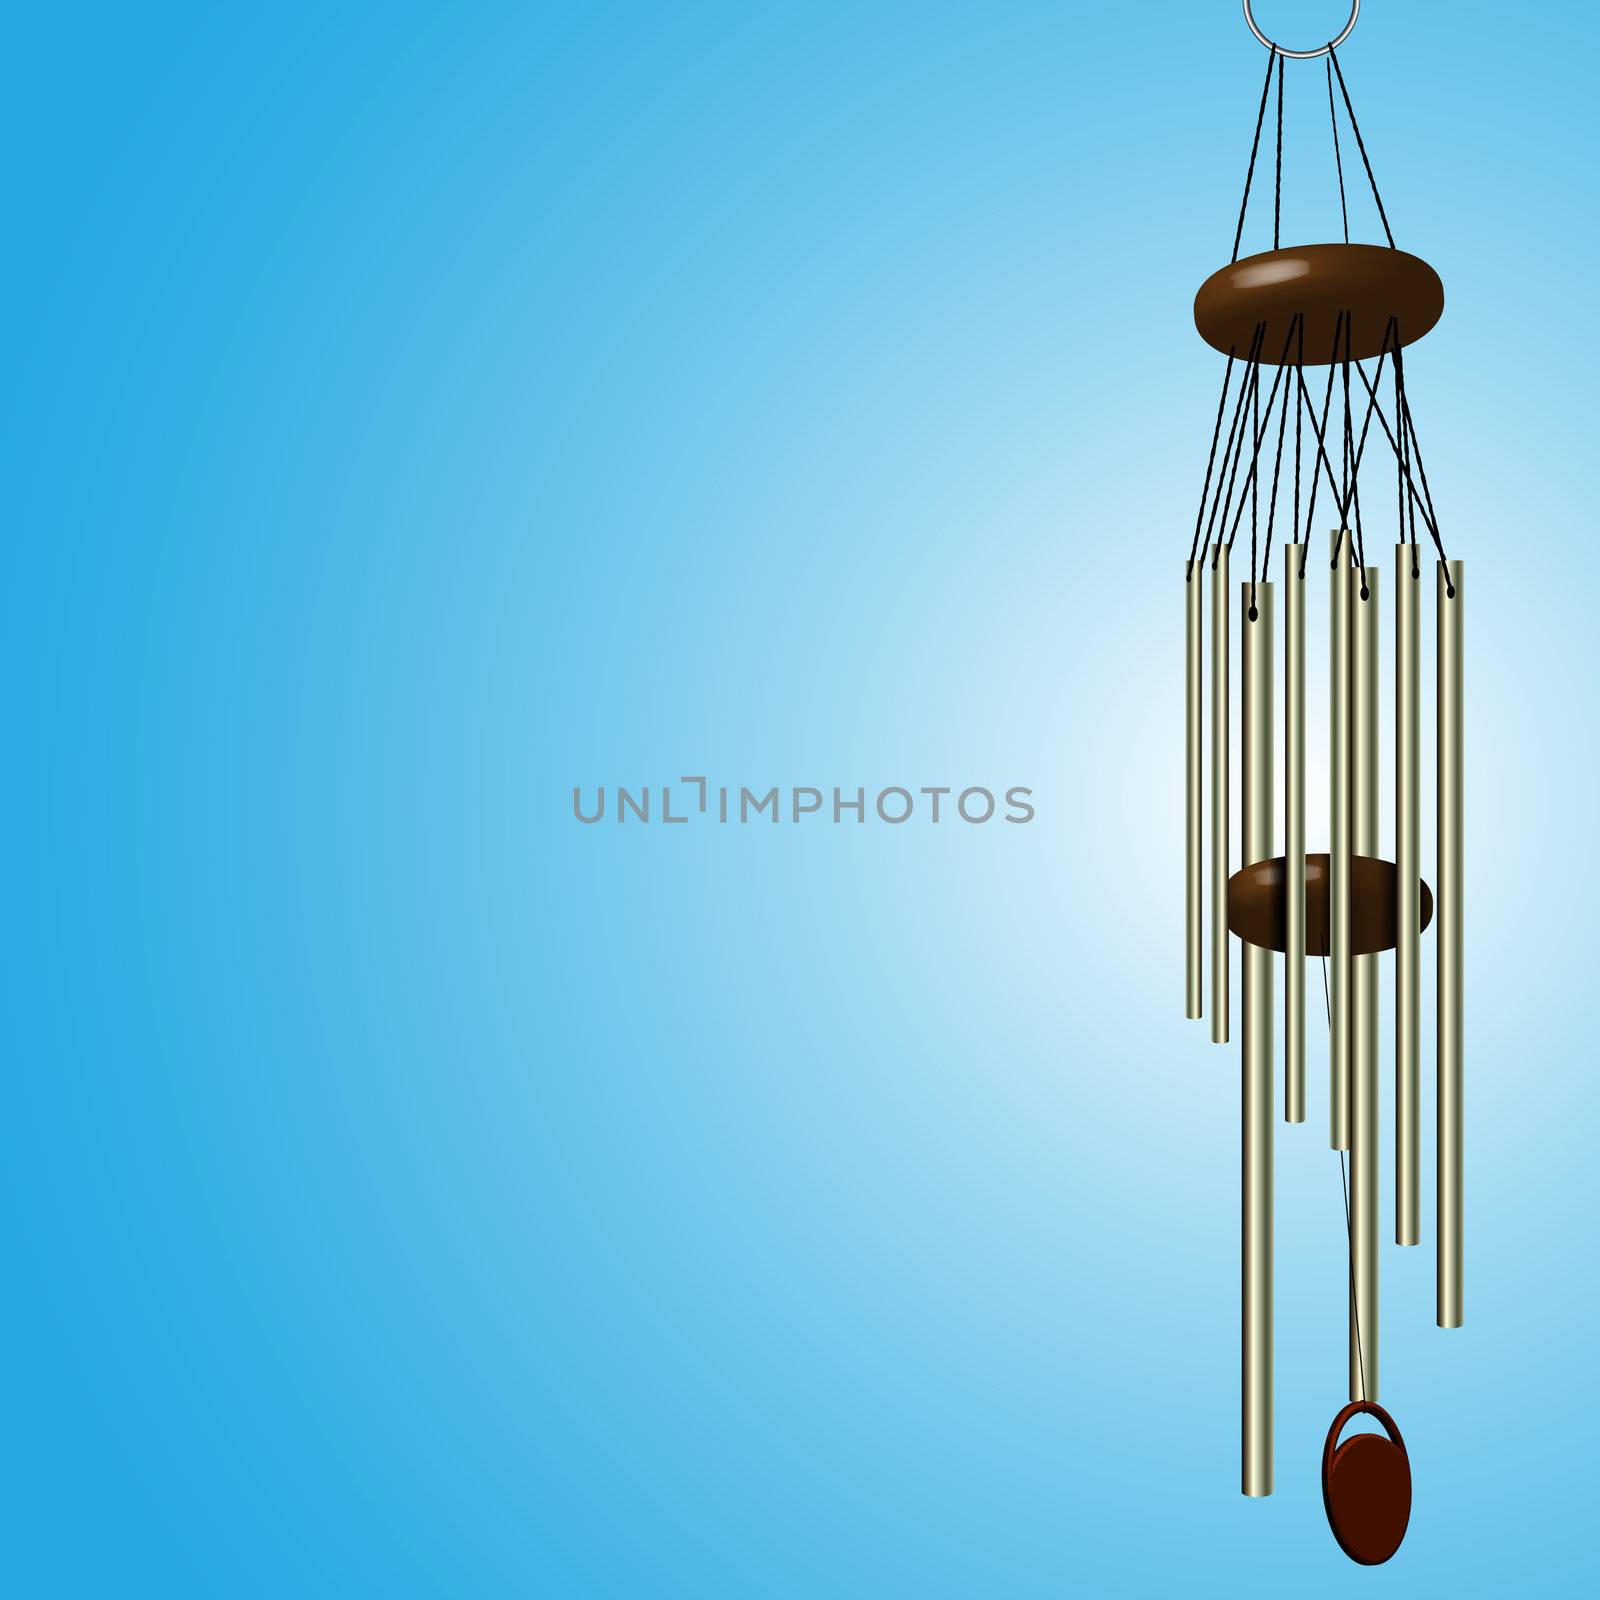 wooden wind chime with metallic pipes, abstract vector art illustration; image contains transparency